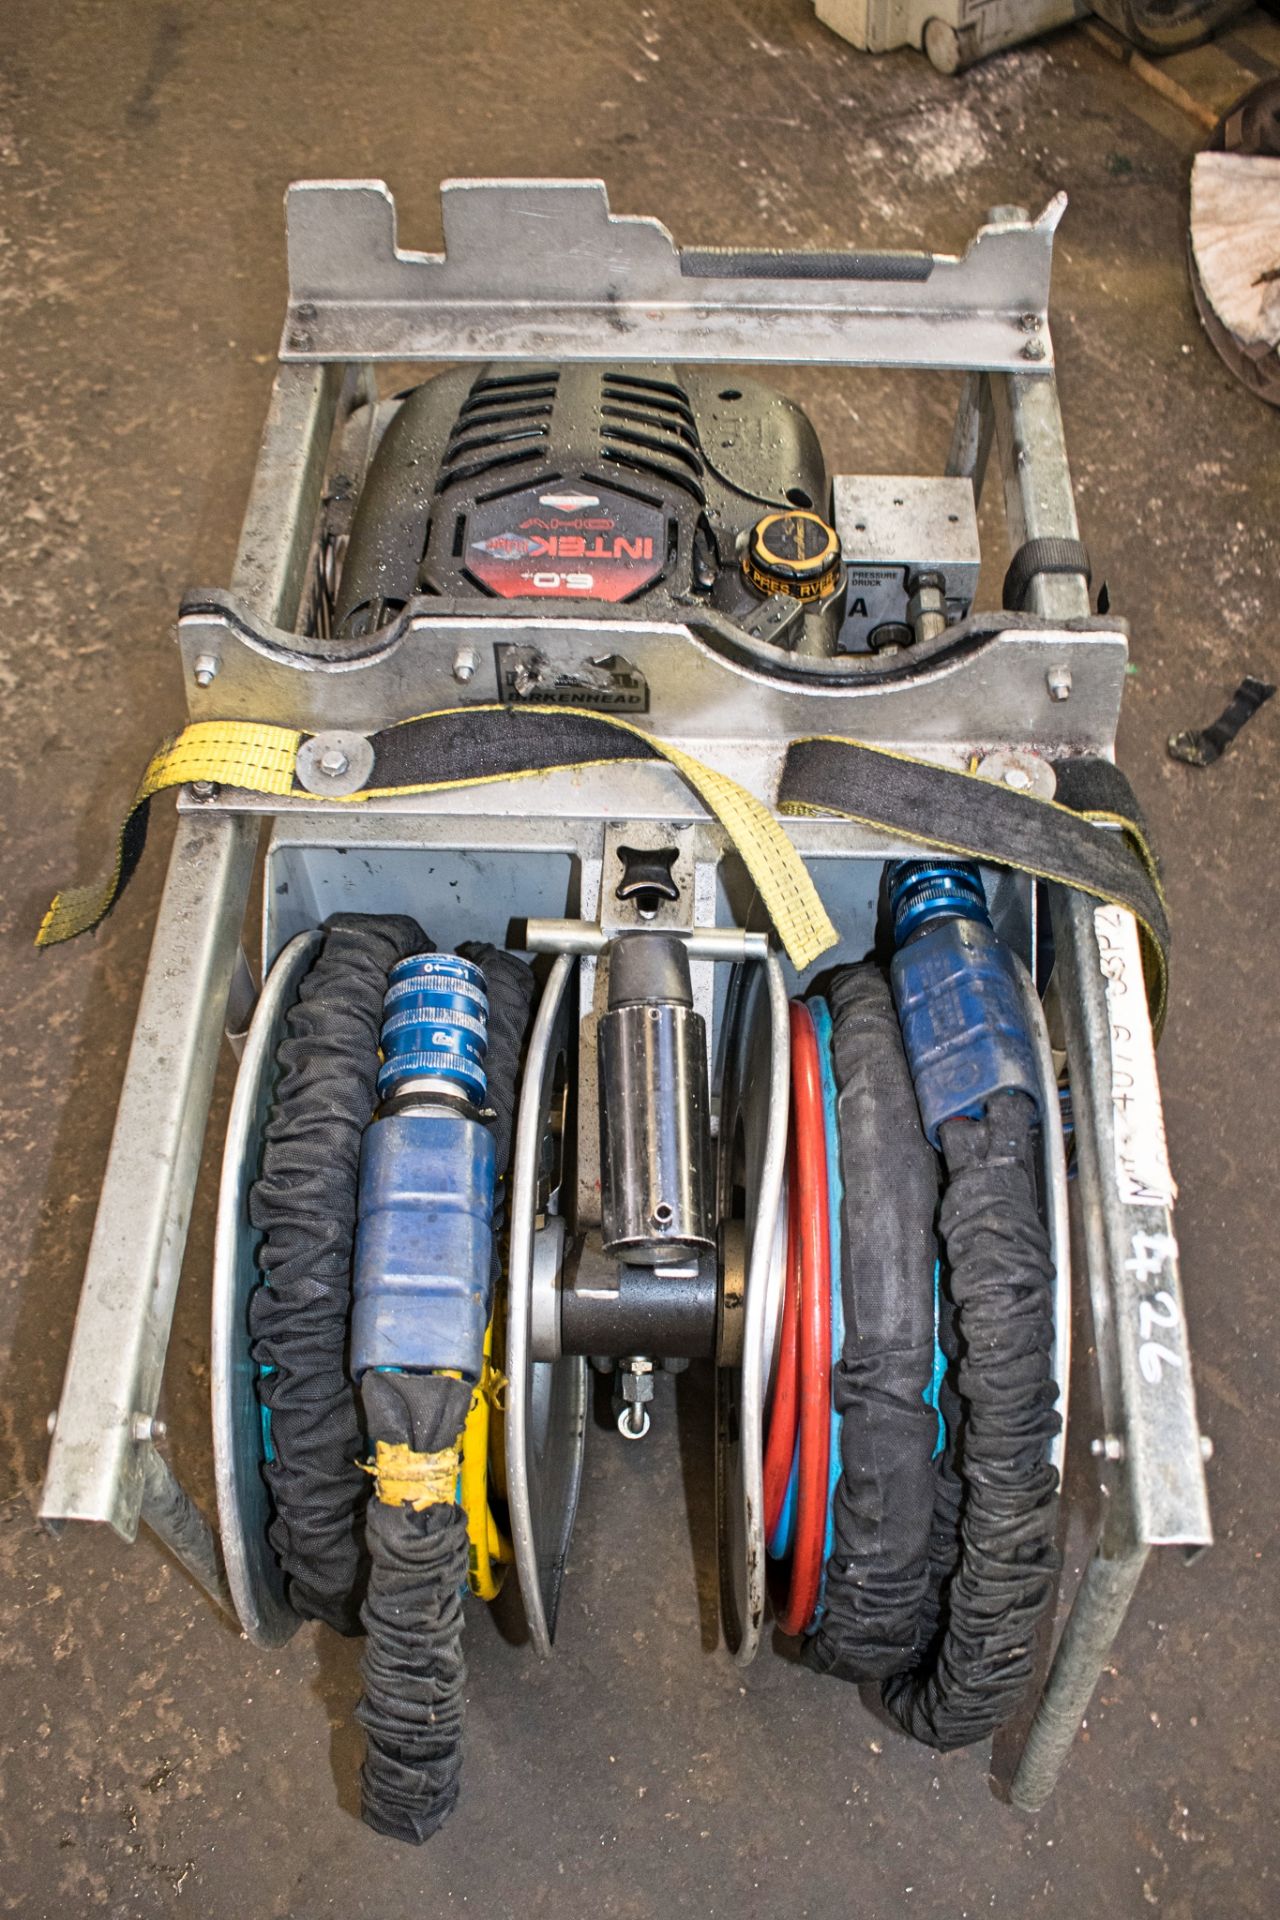 Lukas petrol driven hydraulic rescue system (Jaws of Life) Comprising of: Power pack, jaws,